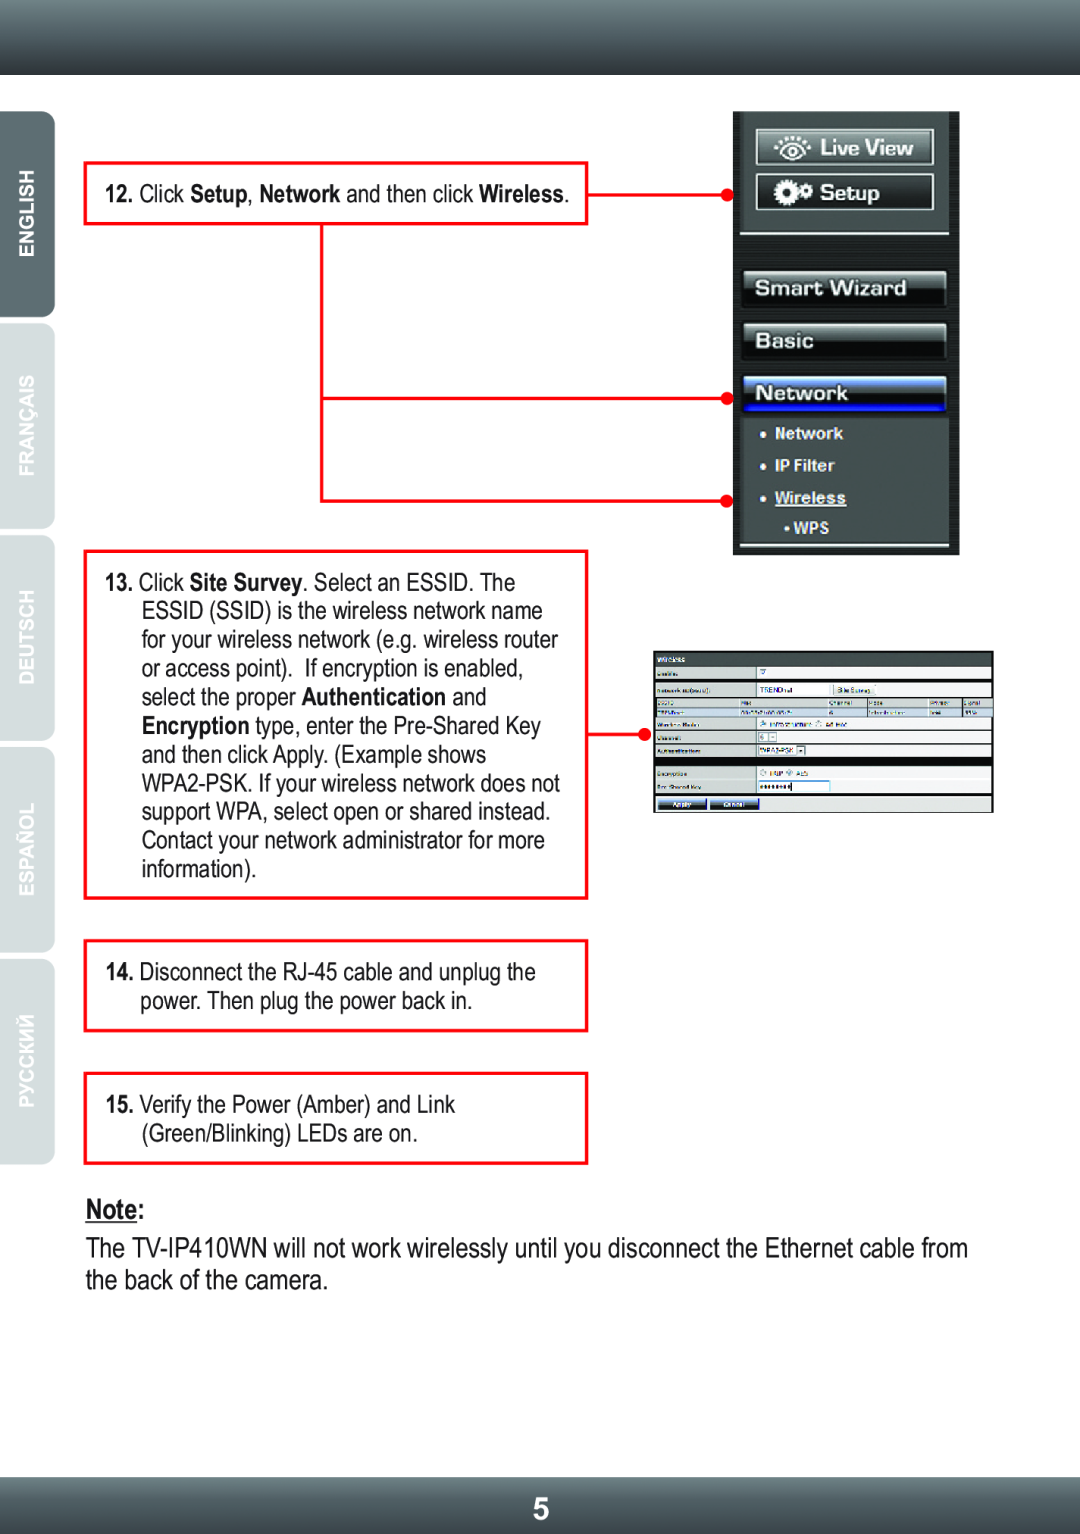 TRENDnet TV-IP410WN, TRENDNET manual Click Setup, Network and then click Wireless 